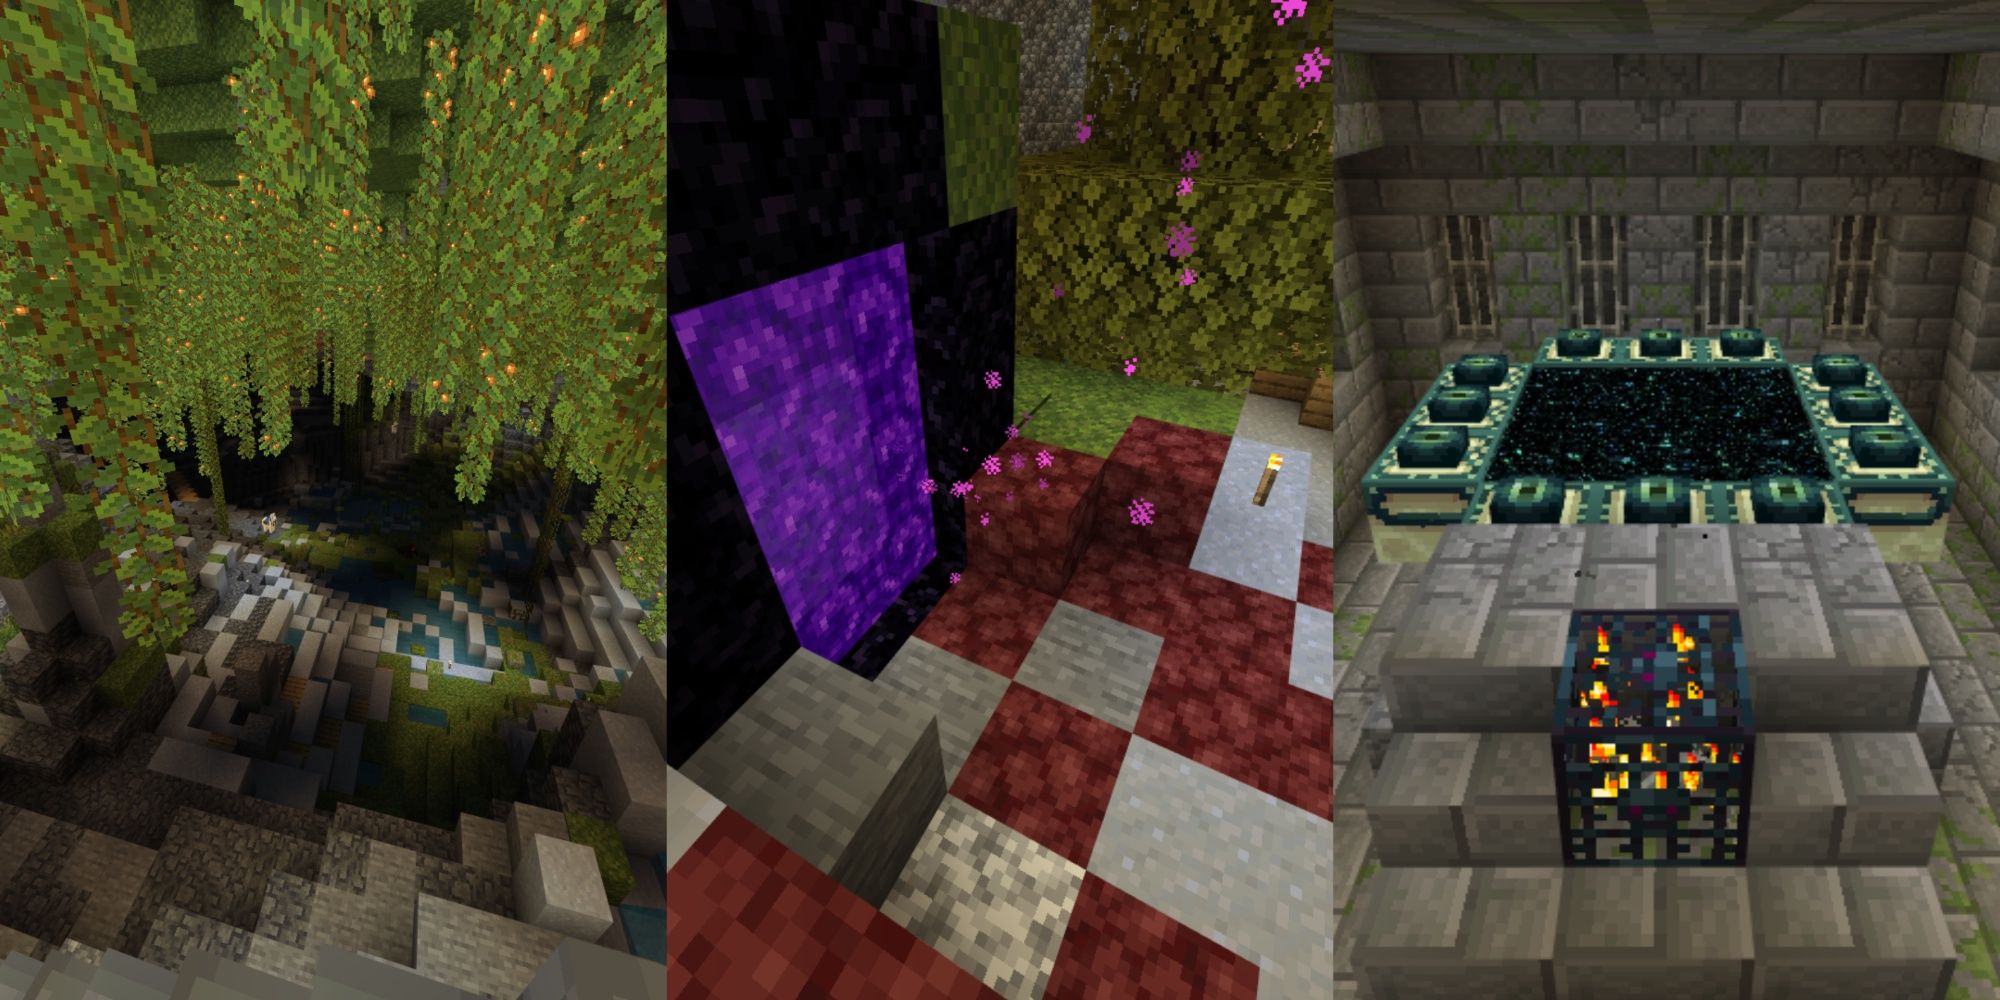 Cave system, Nether portal and end portal